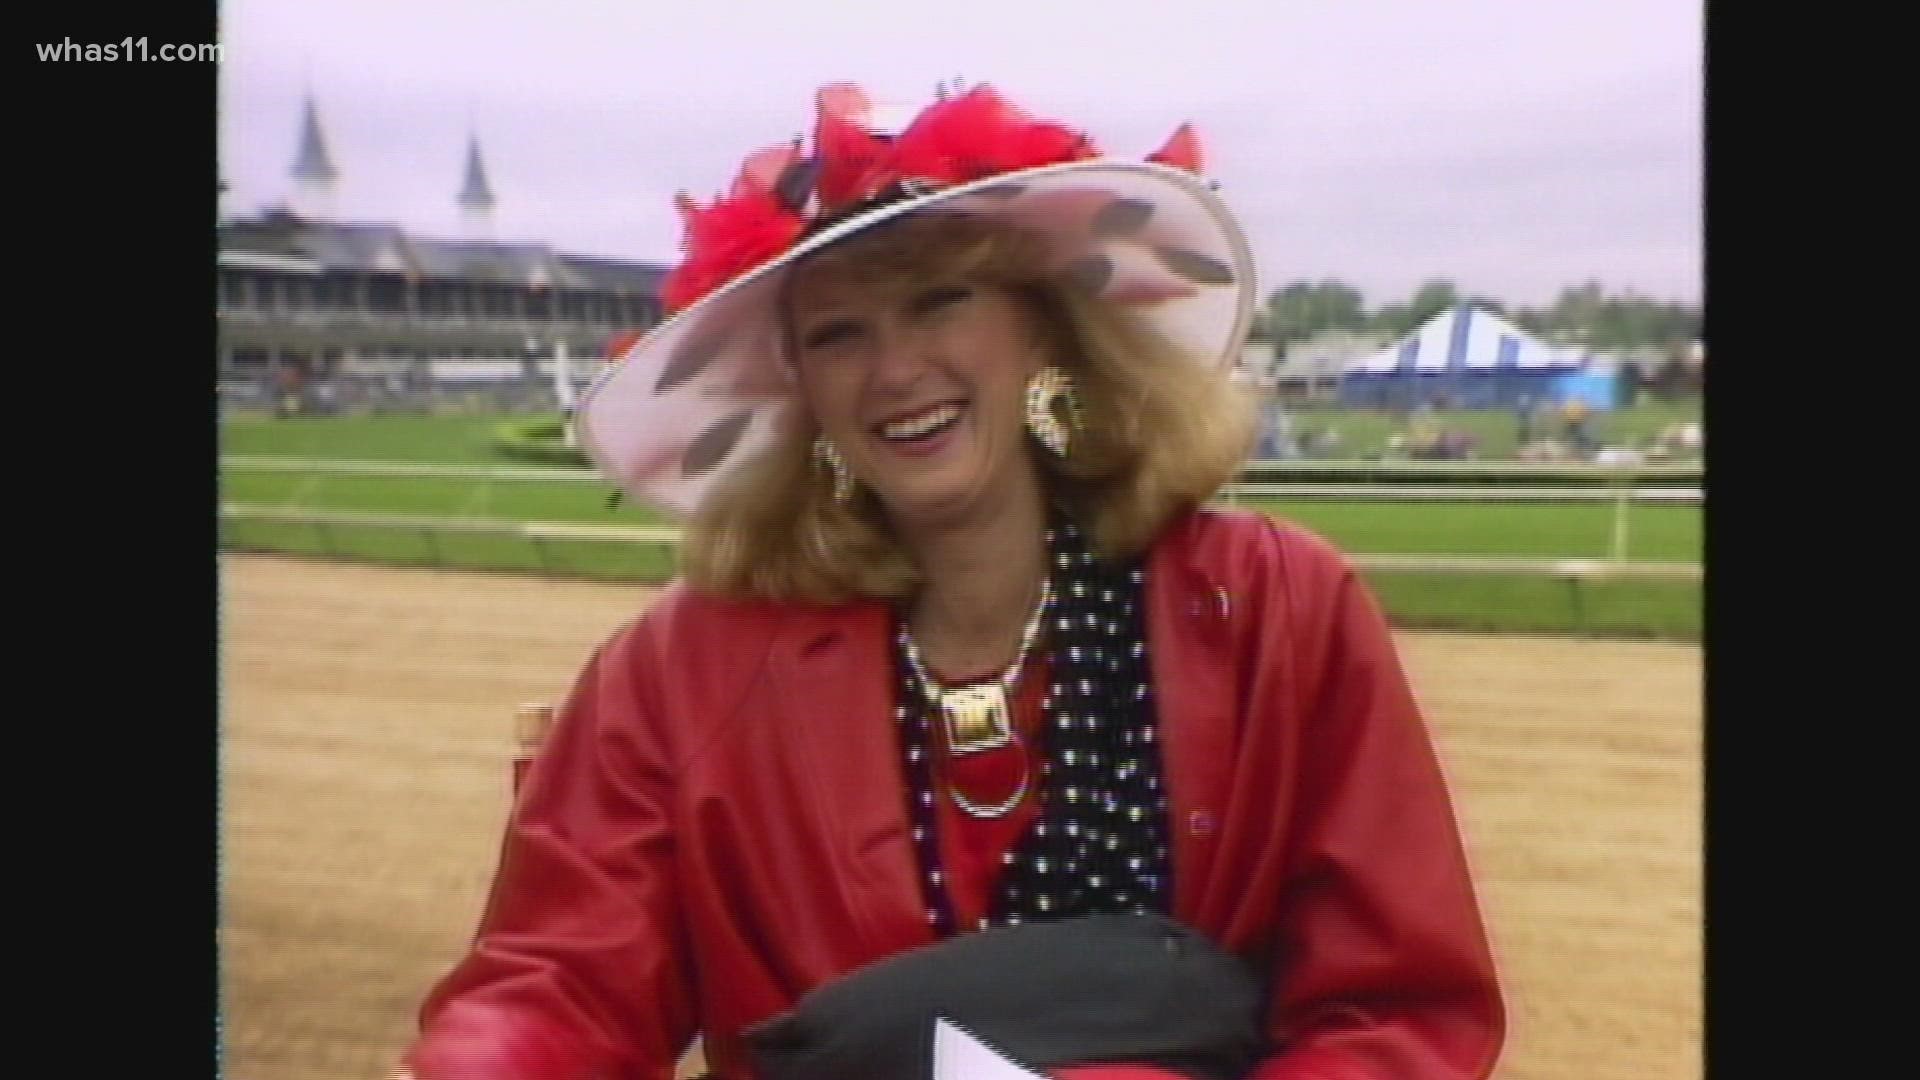 Many of the hats Melissa wore during her six years co-anchoring WHAS11's Derby coverage were specially made for her by famed New York designer Frank Olive.